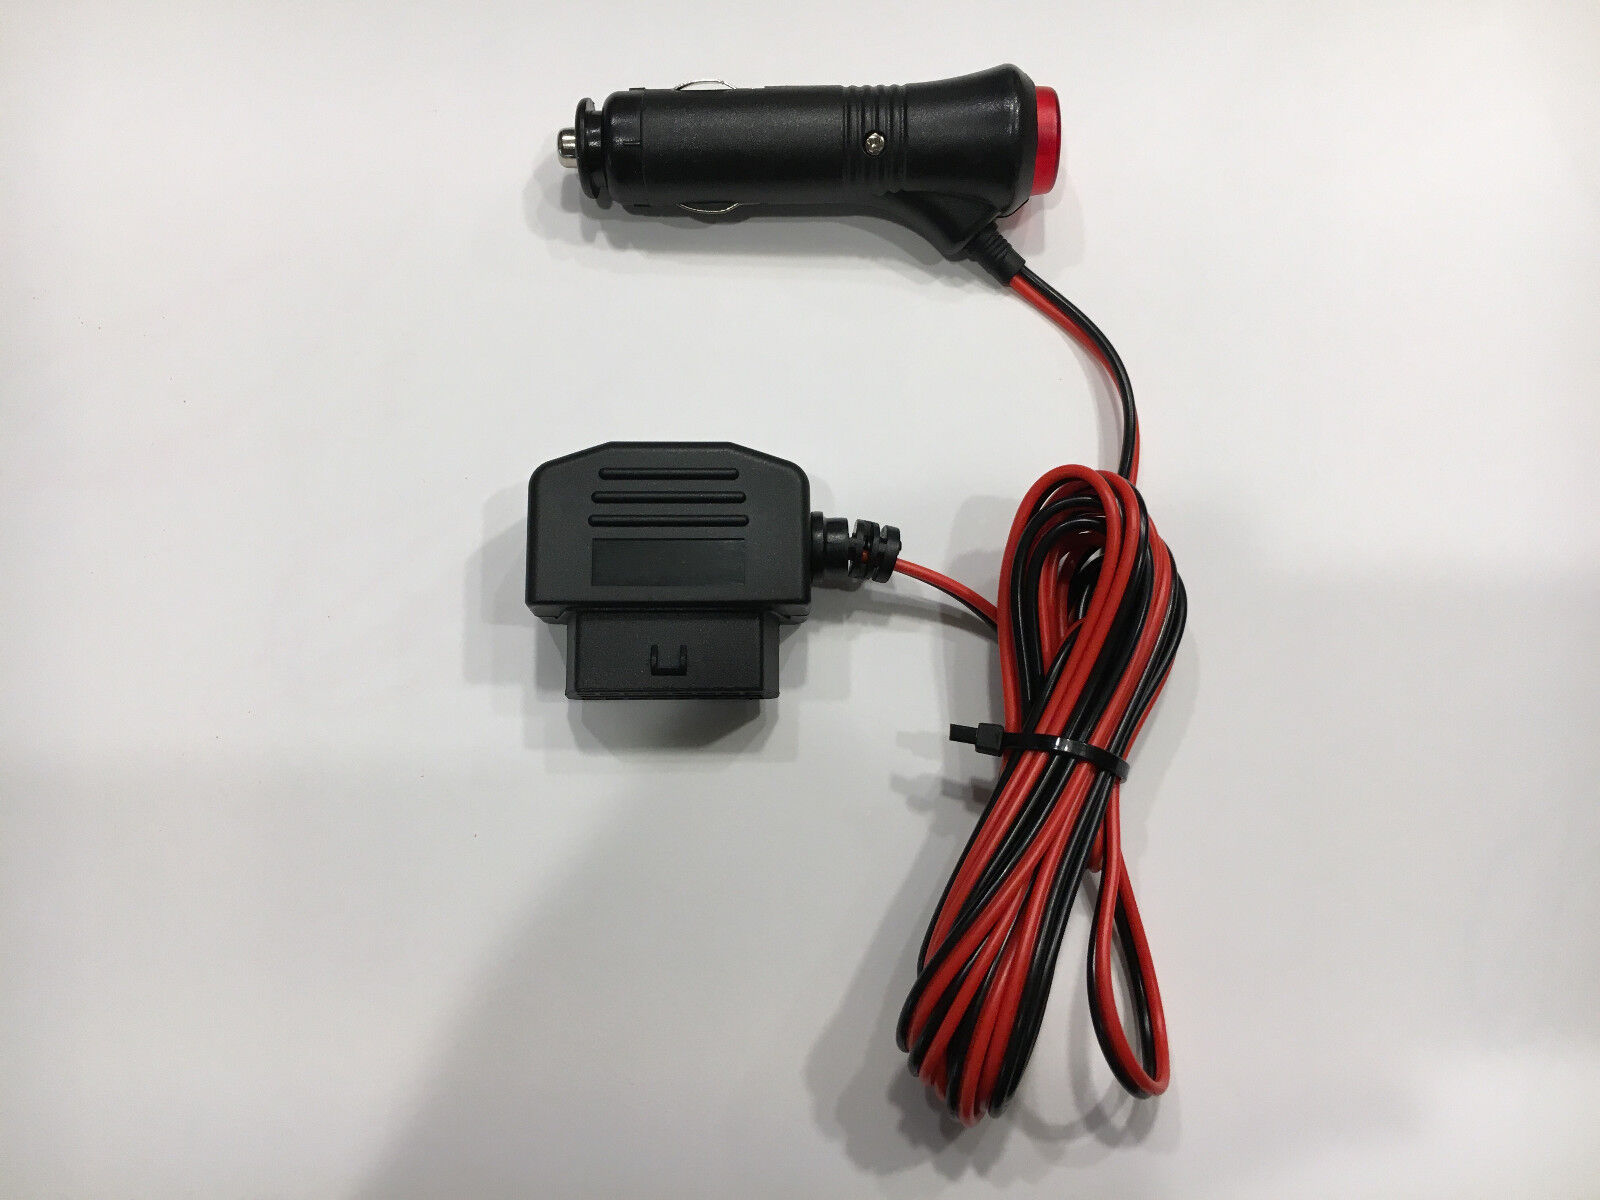 12v Car Plug Adapter for AT&T ZTE Mobley – OBD LTE Wi-Fi Hotspot $20 unlimited